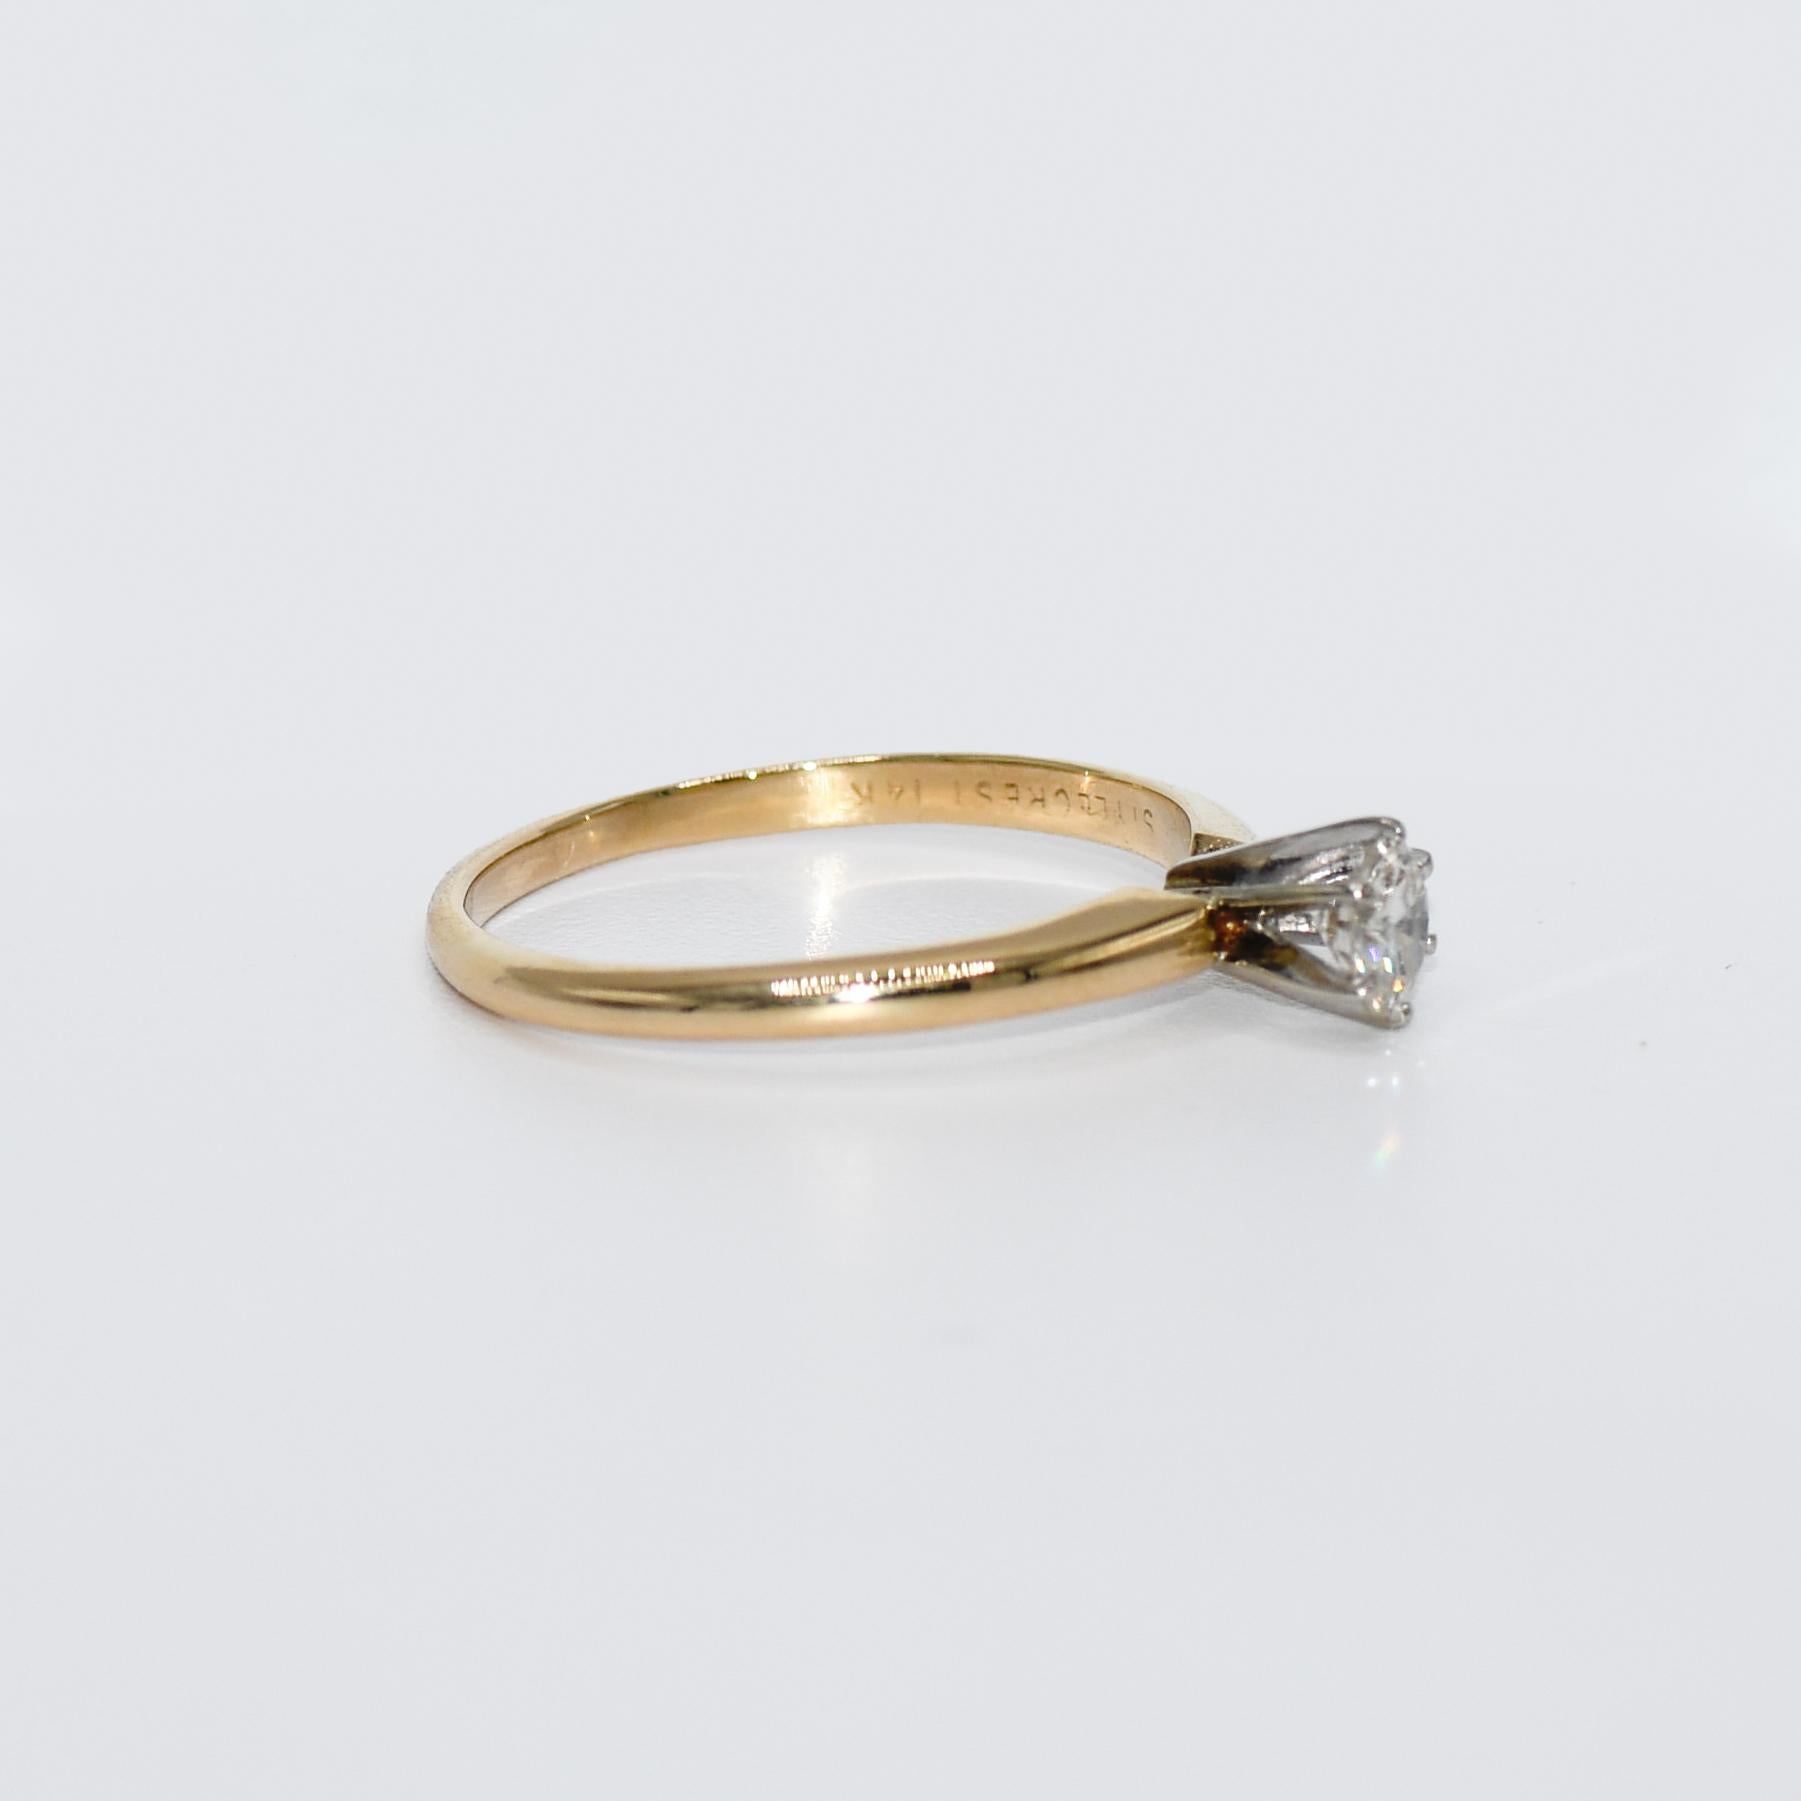 14k Yellow Gold Solitaire Diamond Ring .30ct 2.4gr
14k yellow gold solitaire diamond ring.
The center stone is a RBC, .30ct, SI2 Clarity, G-H-I Color,
Stamped 14k, weighs 2.4gr
Size 8 1/4, can be sized up or down one size for additional fee
Recently